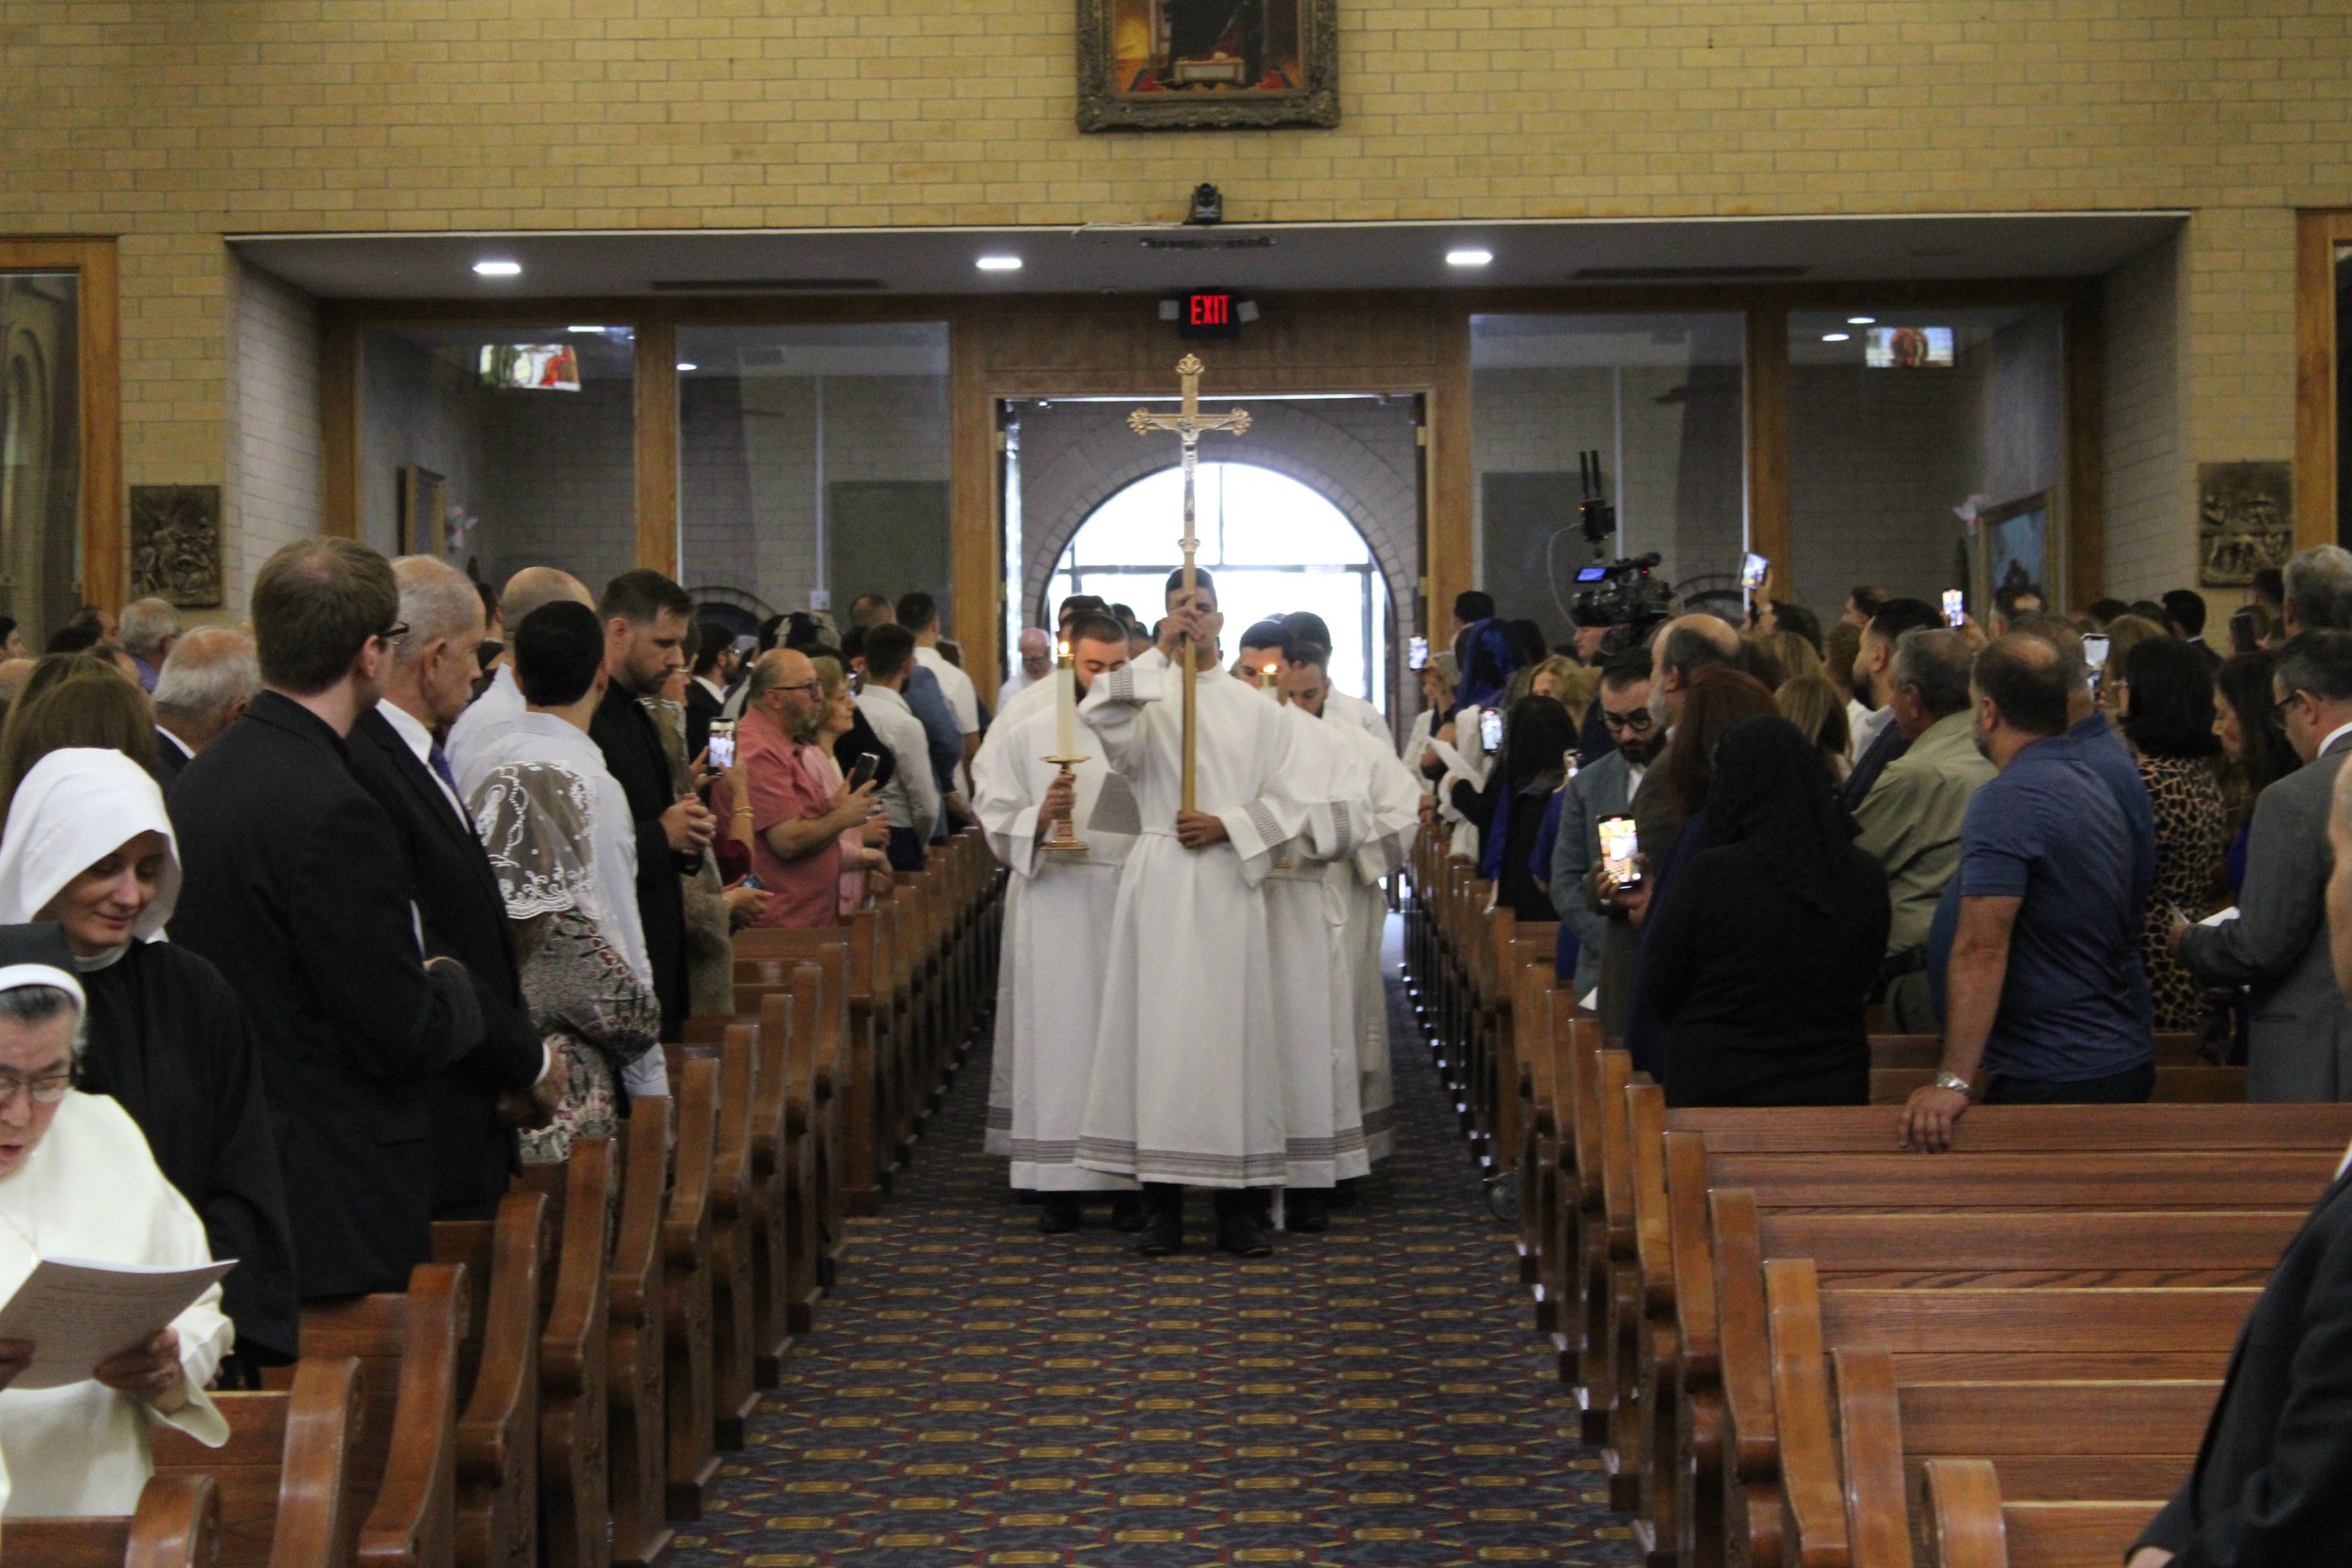  Chaldean seminarians leading the procession for the Ordination Mass. 